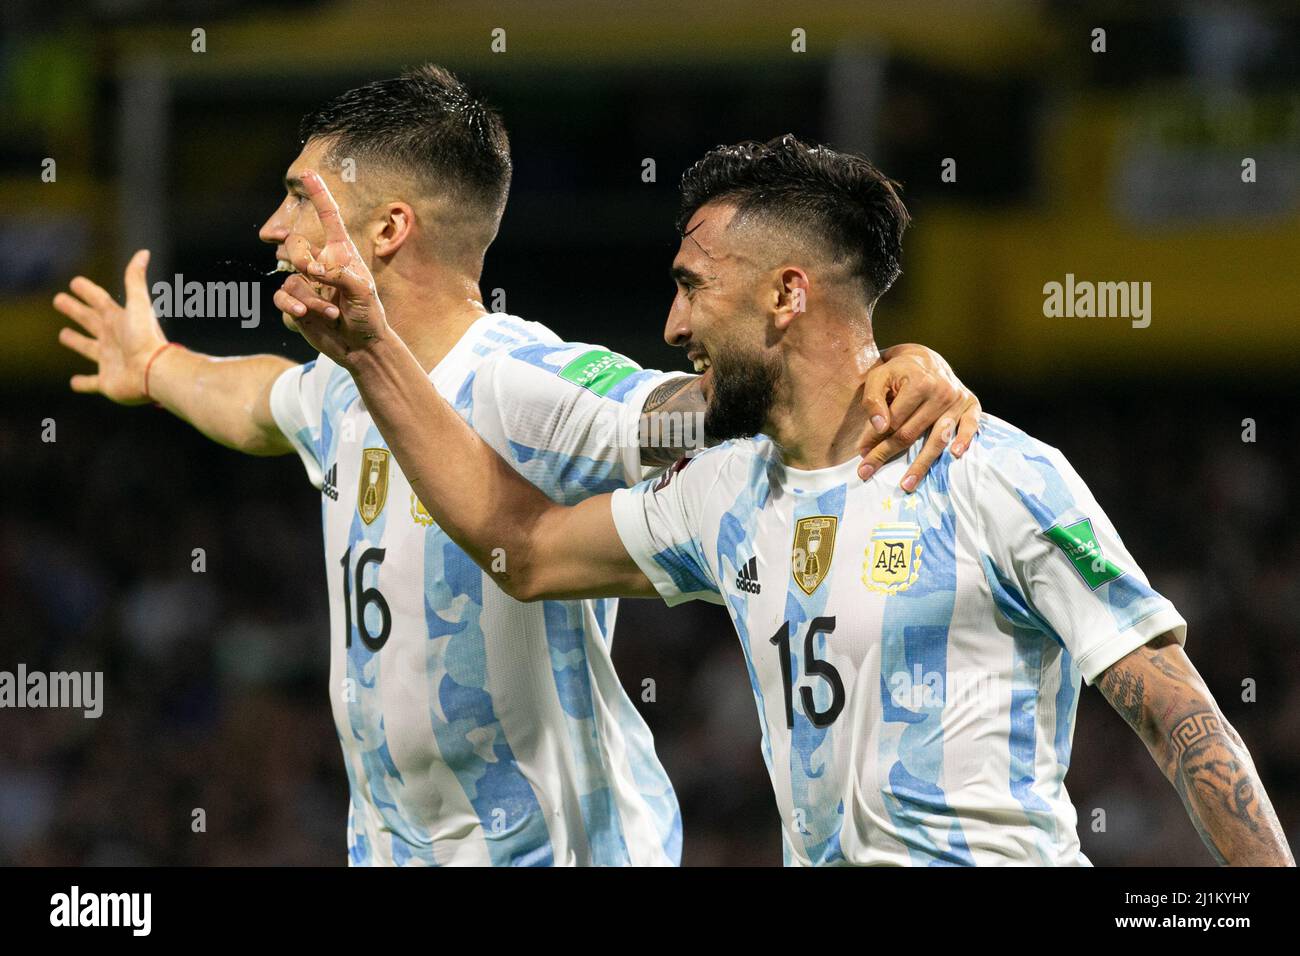 BUENOS AIRES, ARGENTINA - MARCH 25: Nicolás González and Joaquin Correa of Argentina celebrates after scoring a goal during the Fifa World Cup Qualifiers - Conmebol match between Argentina and Venezuela at La Bombonera Stadium on March 25, 2022 in Buenos Aires, Argentina. (Photo by Florencia Tan Jun/Pximages) Stock Photo